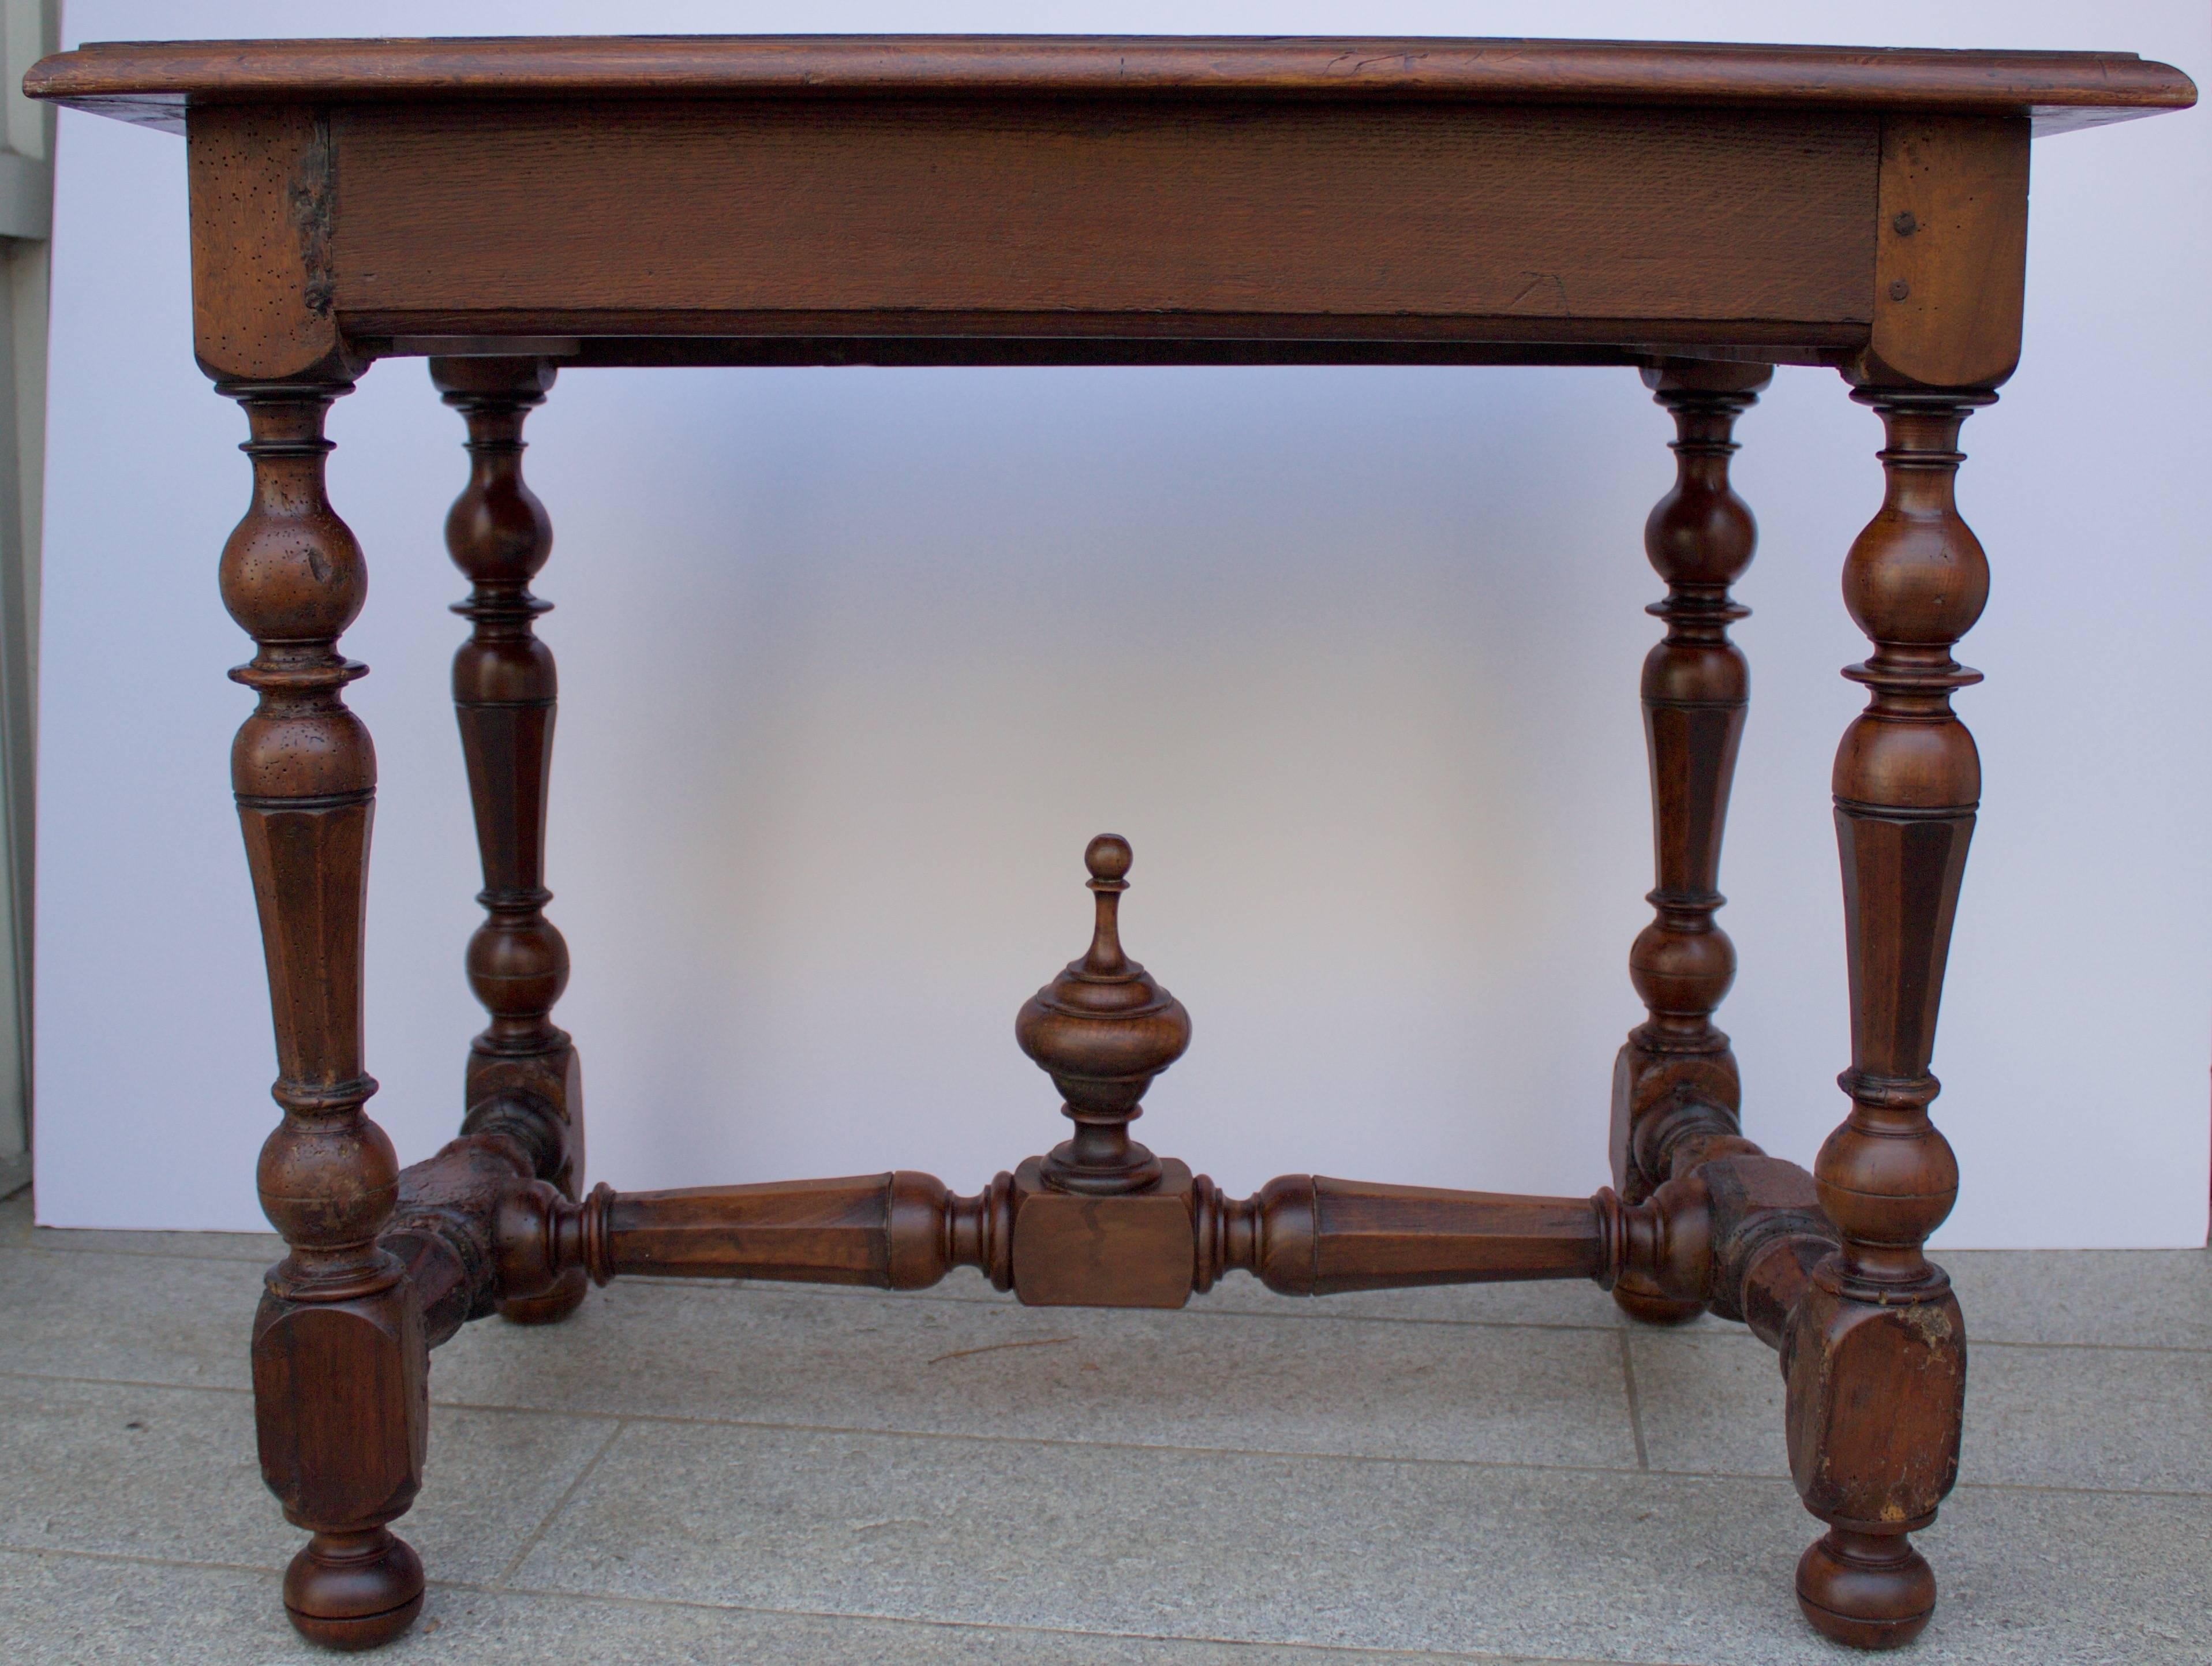 Hand-Carved 18th Century Louis XIV Style Writing Table